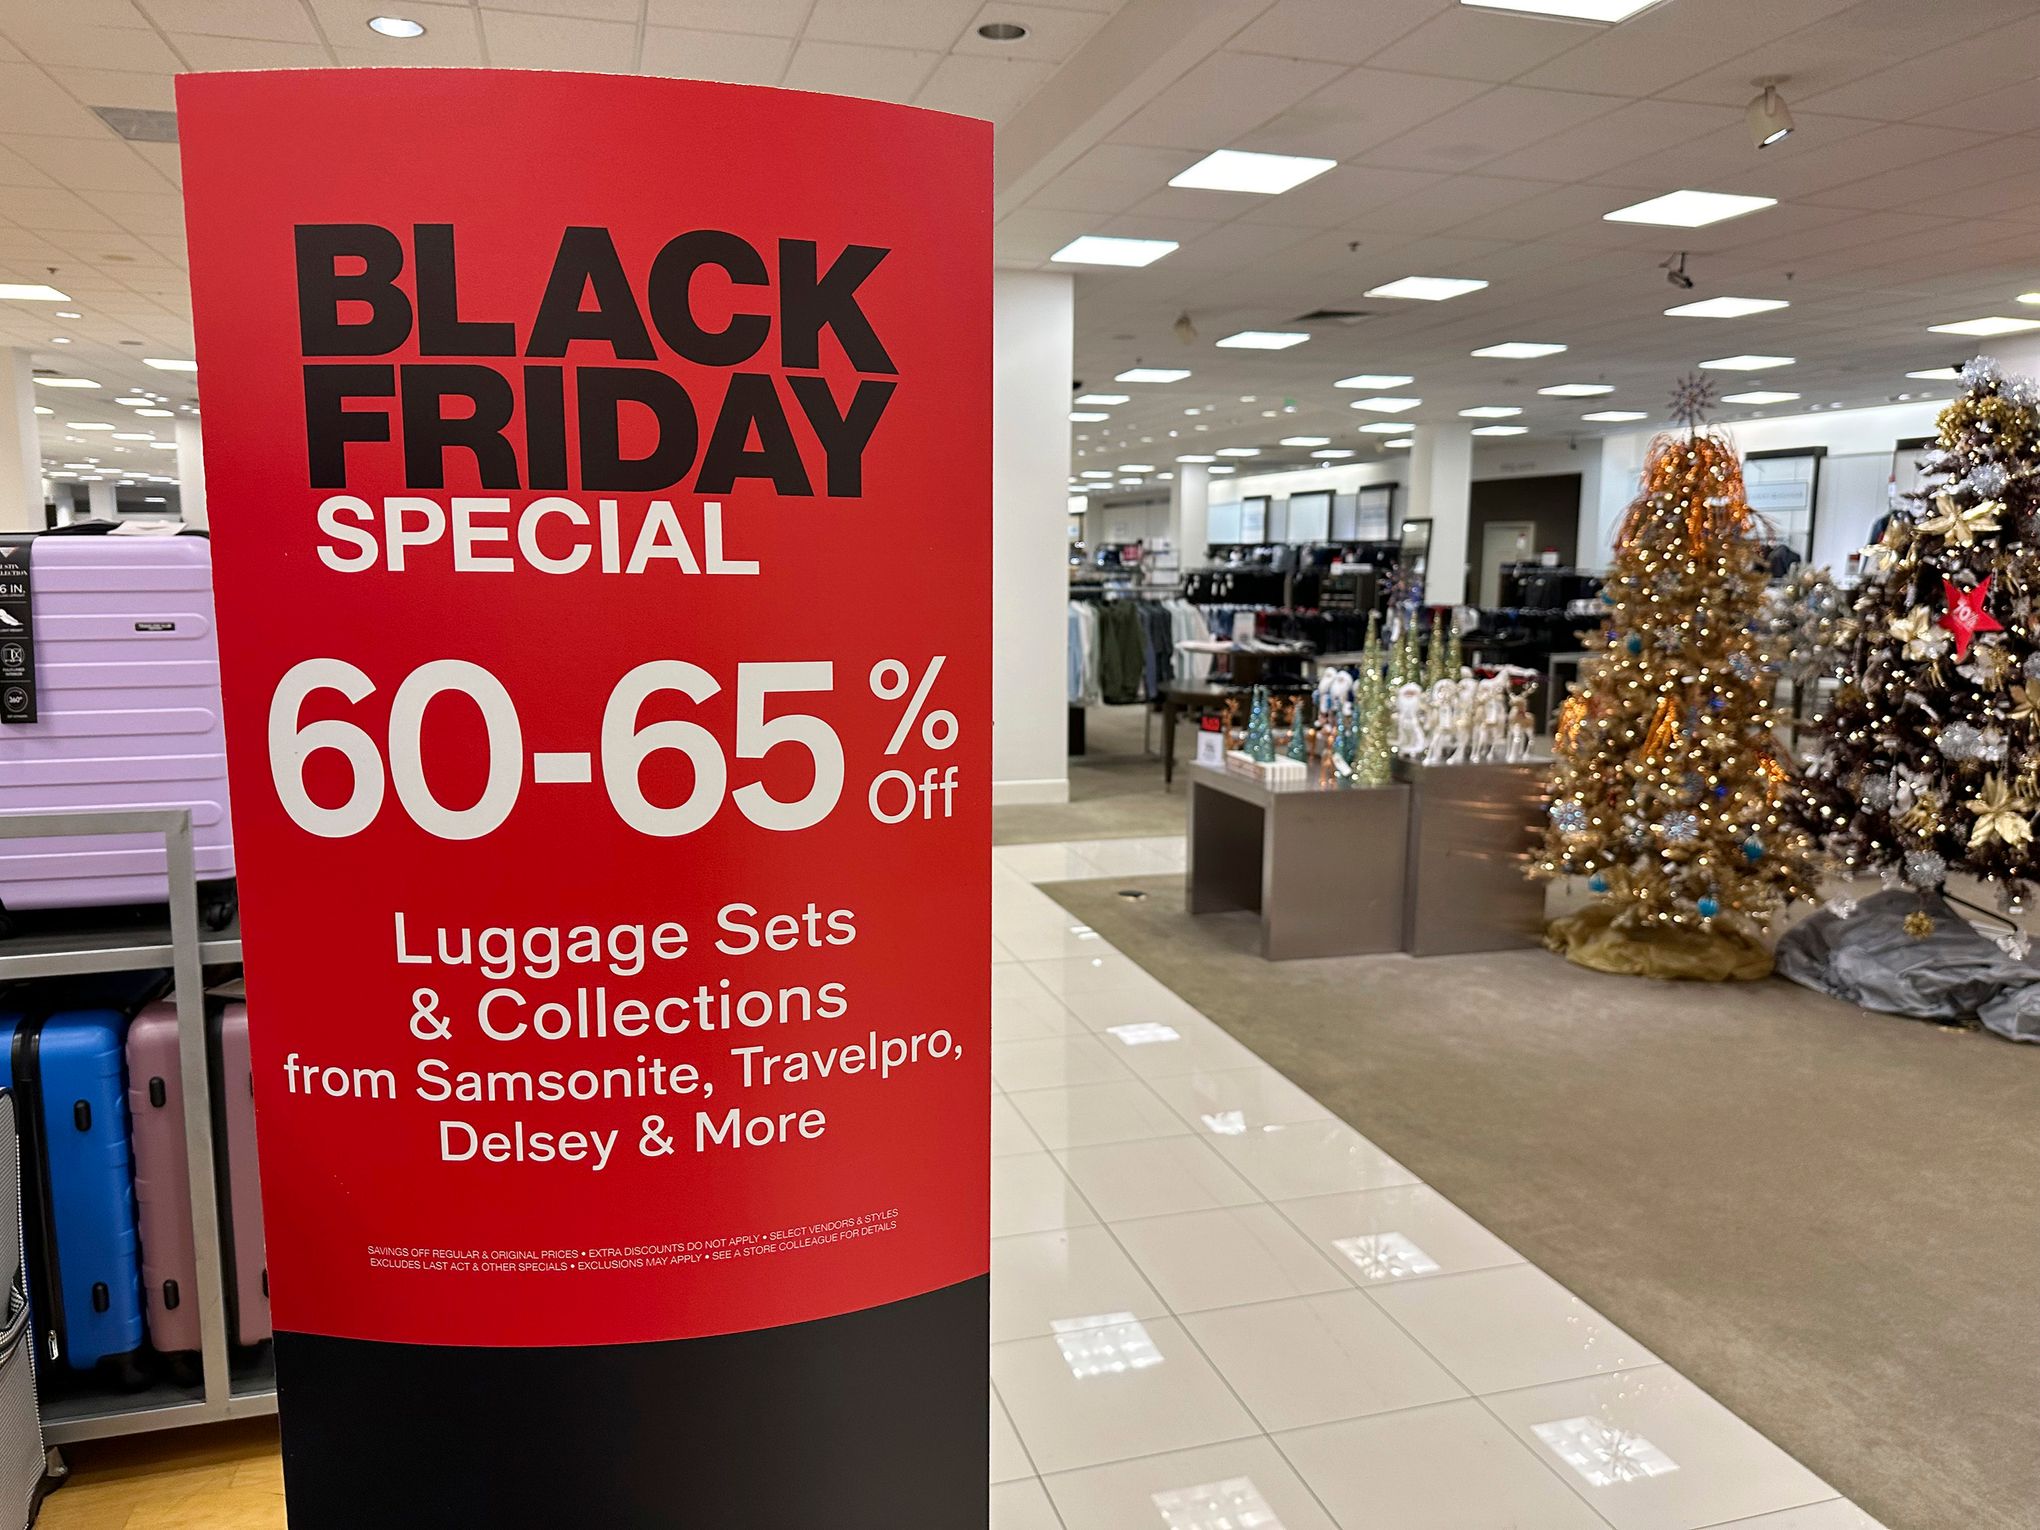 Holiday shopping: Buy these items BEFORE Black Friday!